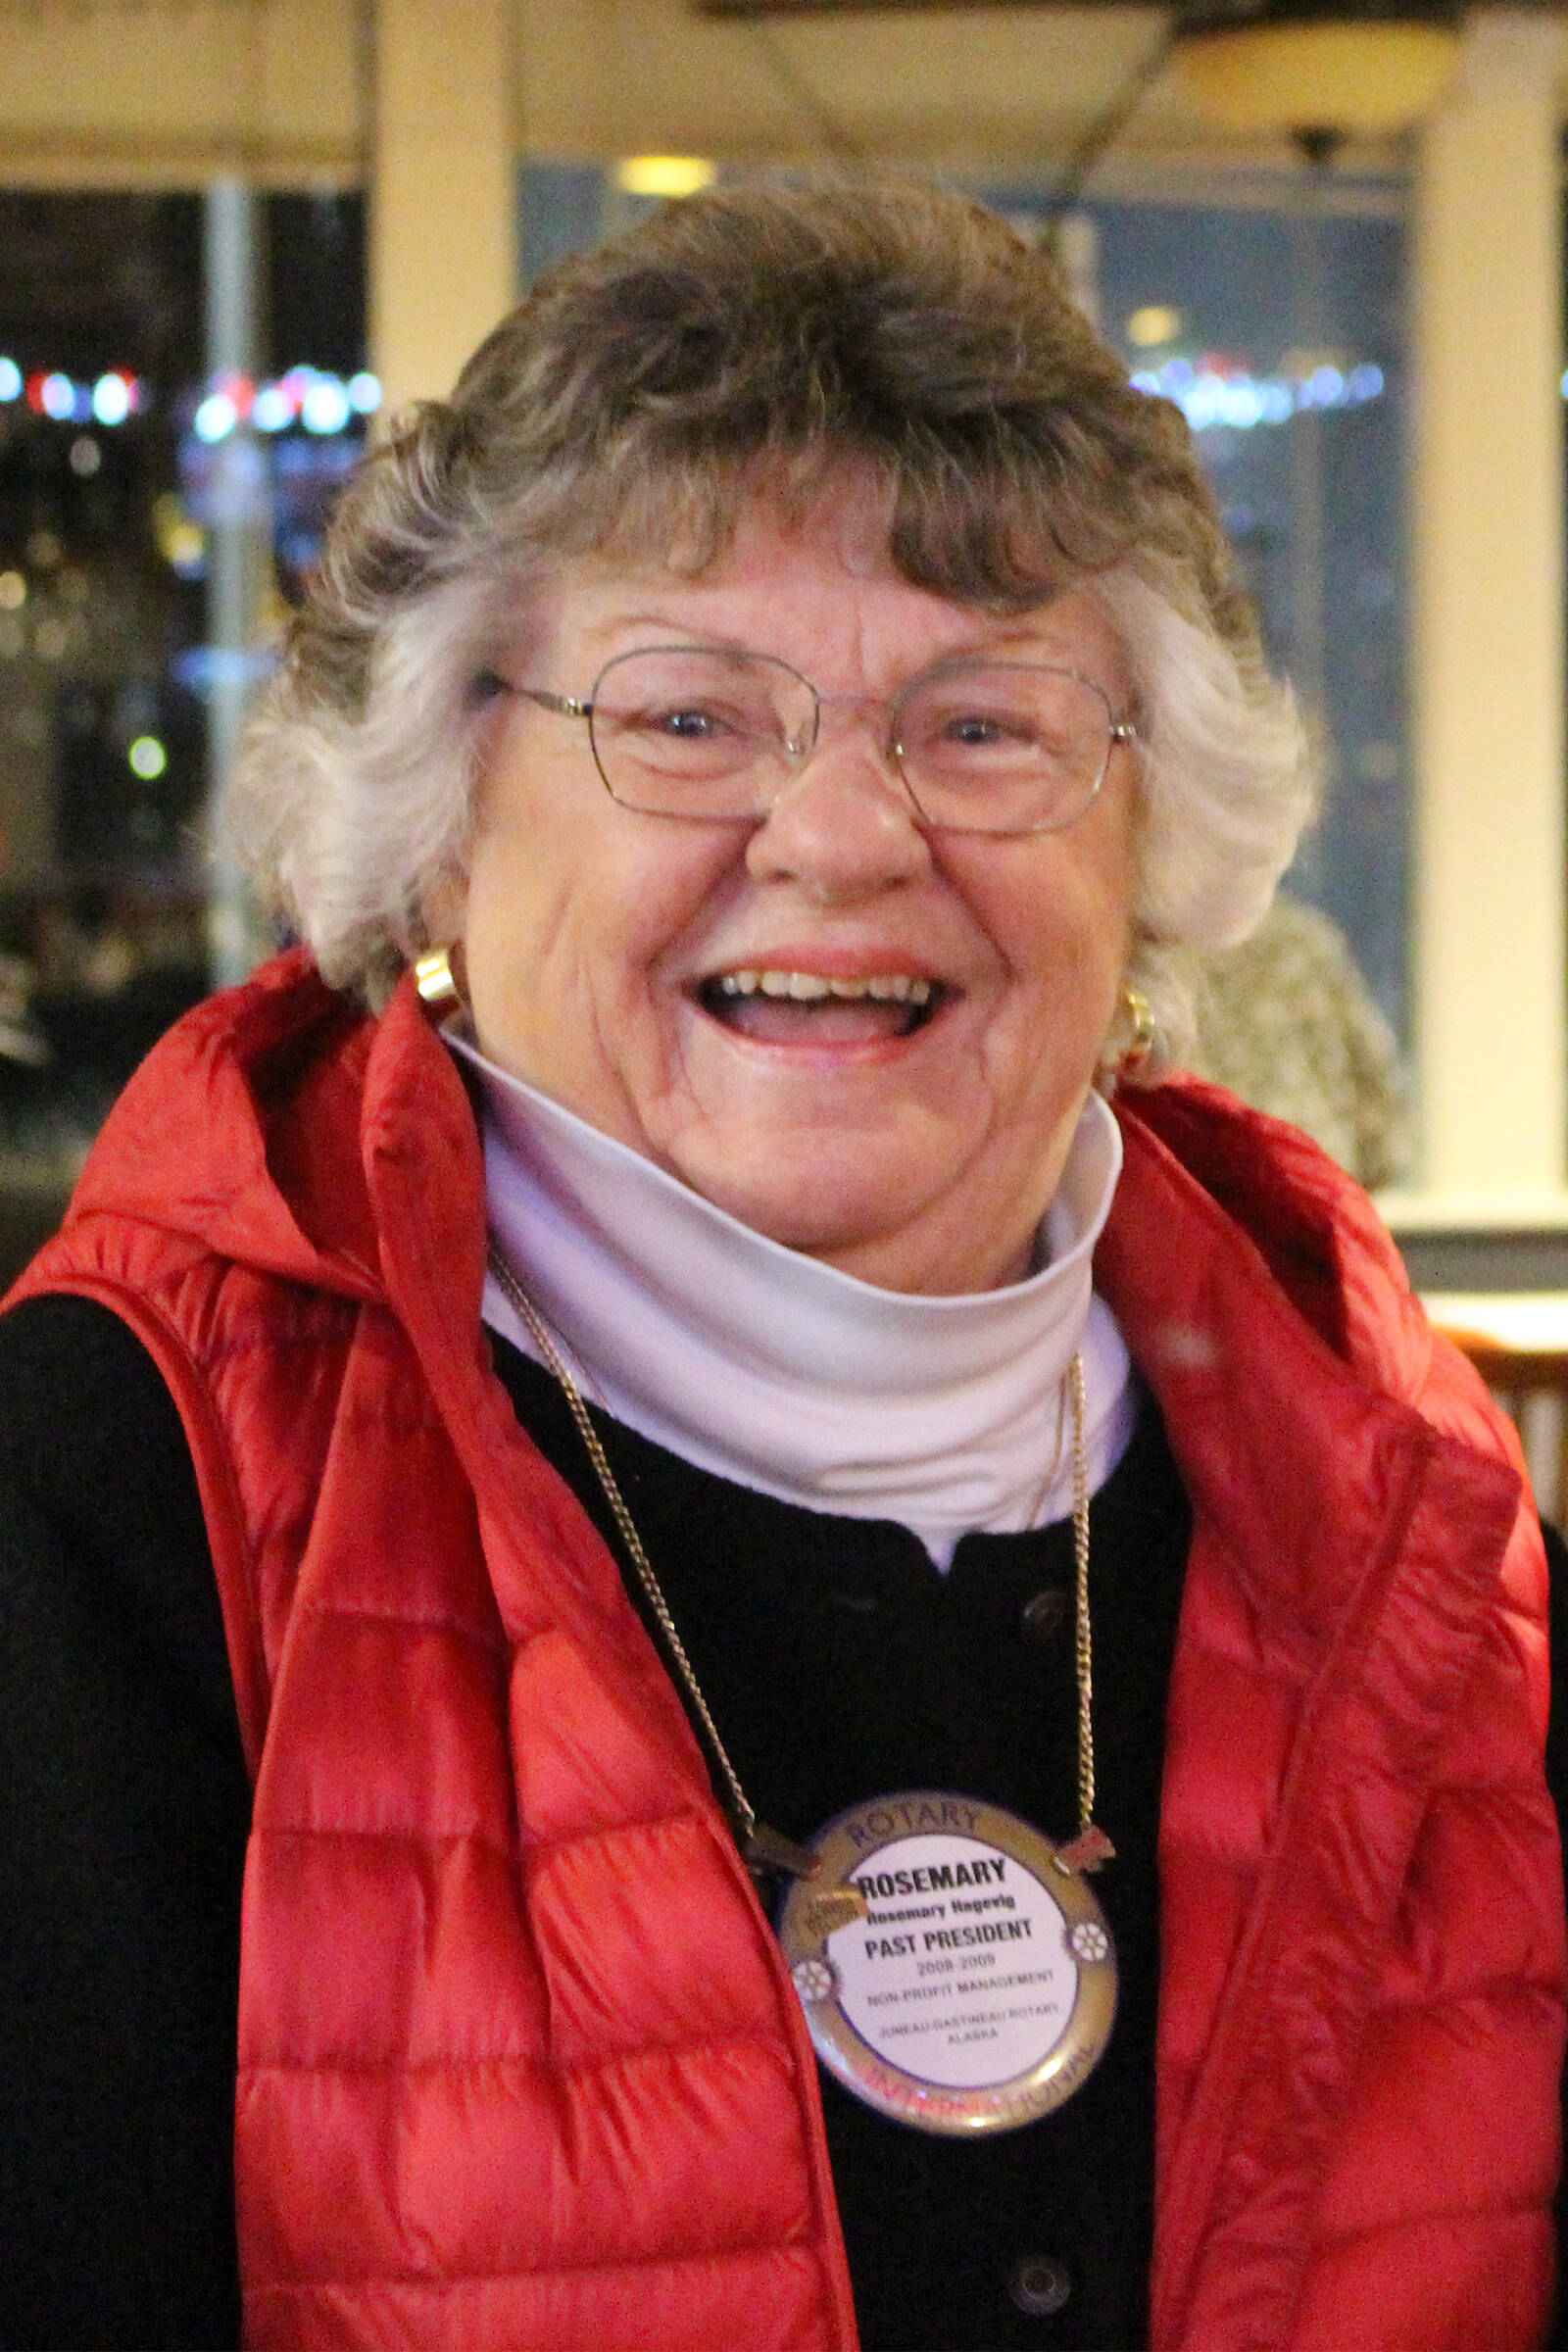 Courtesy Photo / Candy Behrends
This photo shows Rosemary Hagevig, who died on Thursday after a battle with illness.